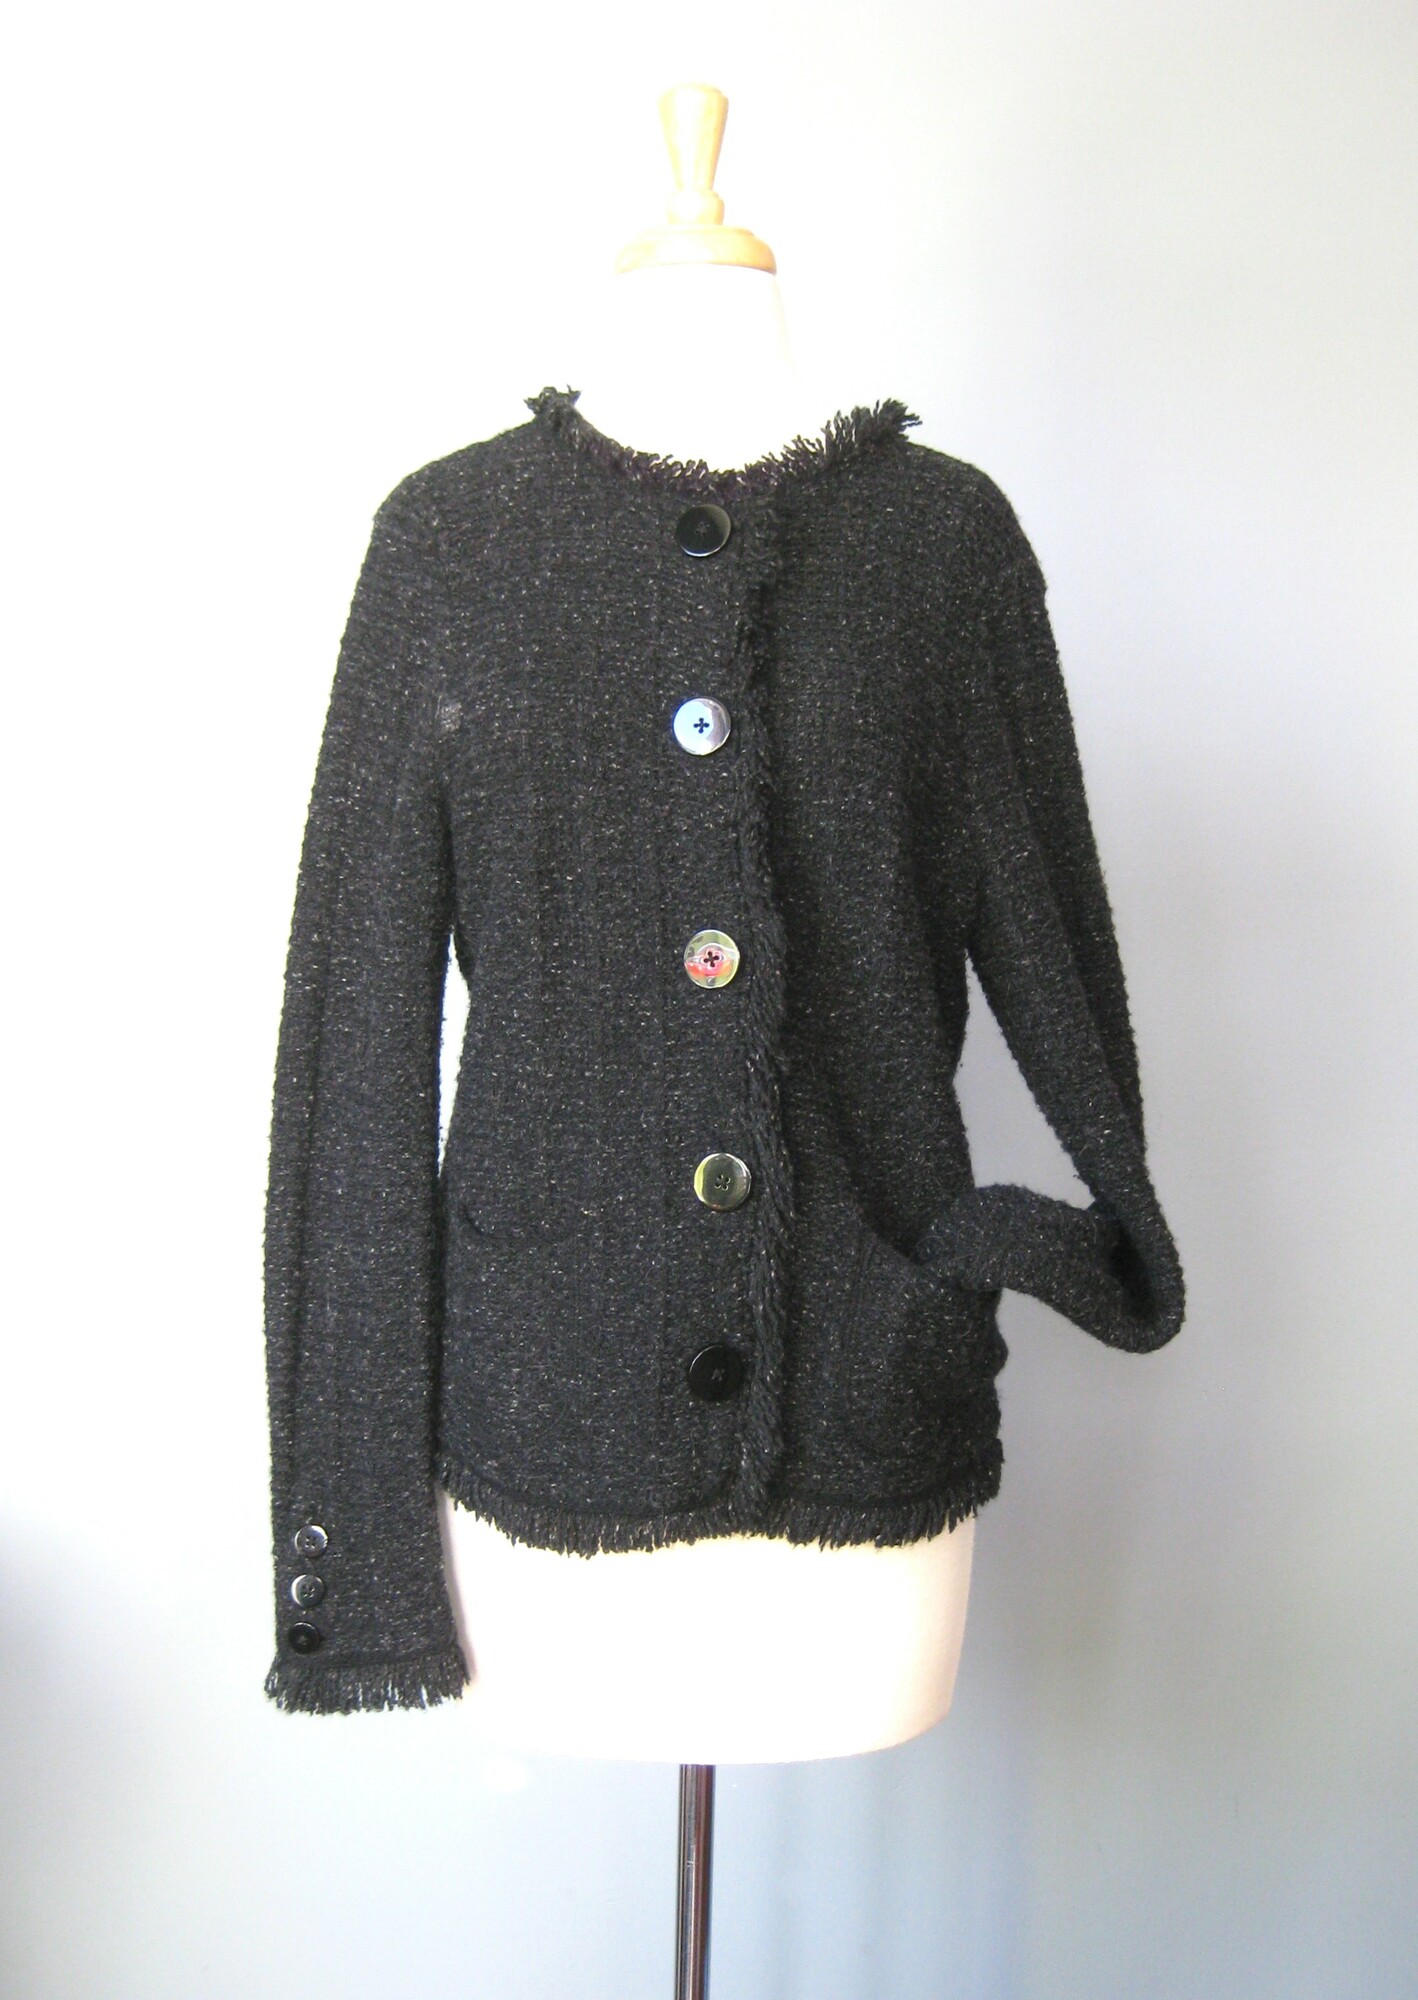 Tweed Cardigain Wool, Black, Size: Medium
You are professional, classic and expensive looking in this nice warm cardigan by an unknown maker in a wool blend tweed that includes alpaca
The colors are black gray and white
Classic styling
Works as a jacket or a top layer cardigan
fringed edges
button closure
working pockets
super comfy
Excellent condition
plenty of stretch, unlined
Here are the flat measurements, please double where appropriate:

Armpit to armpit: 19
width at hem when buttoned: 20
underarm sleeve seam: 19
Overall length: 24

Thanks for looking!
#42041